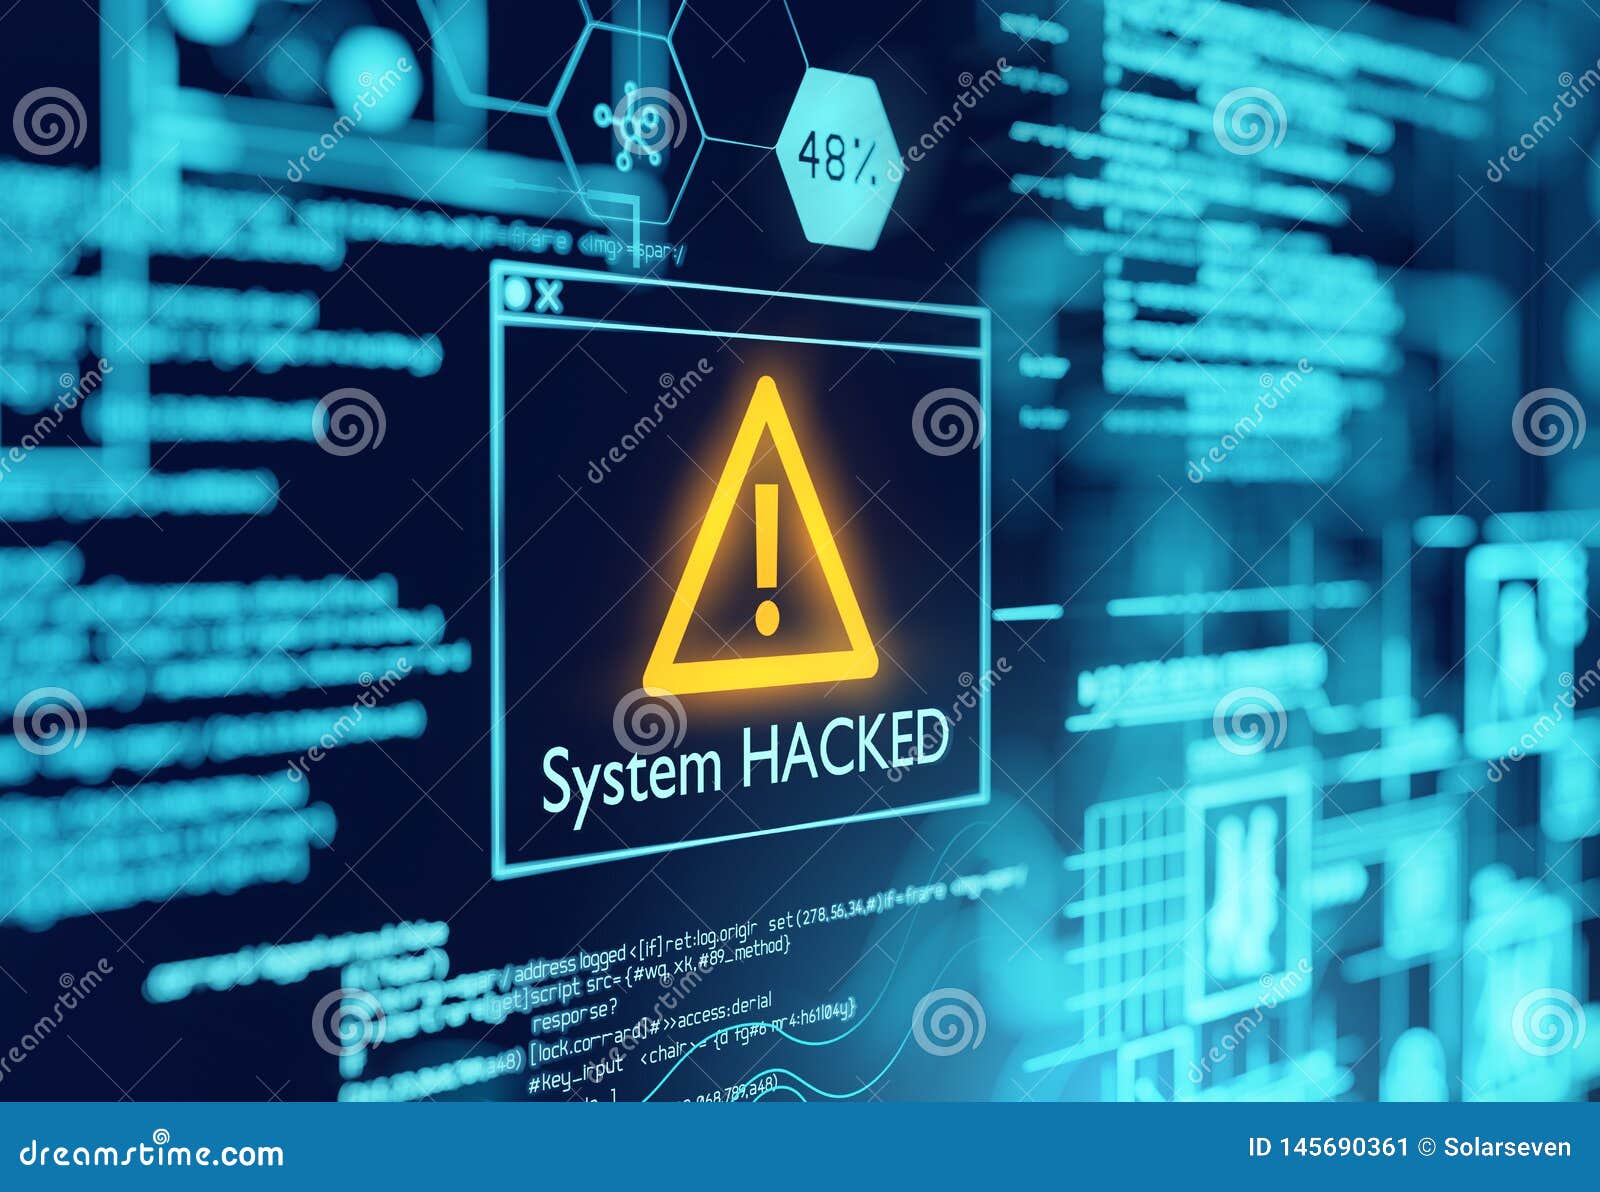 a computer system hacked warning